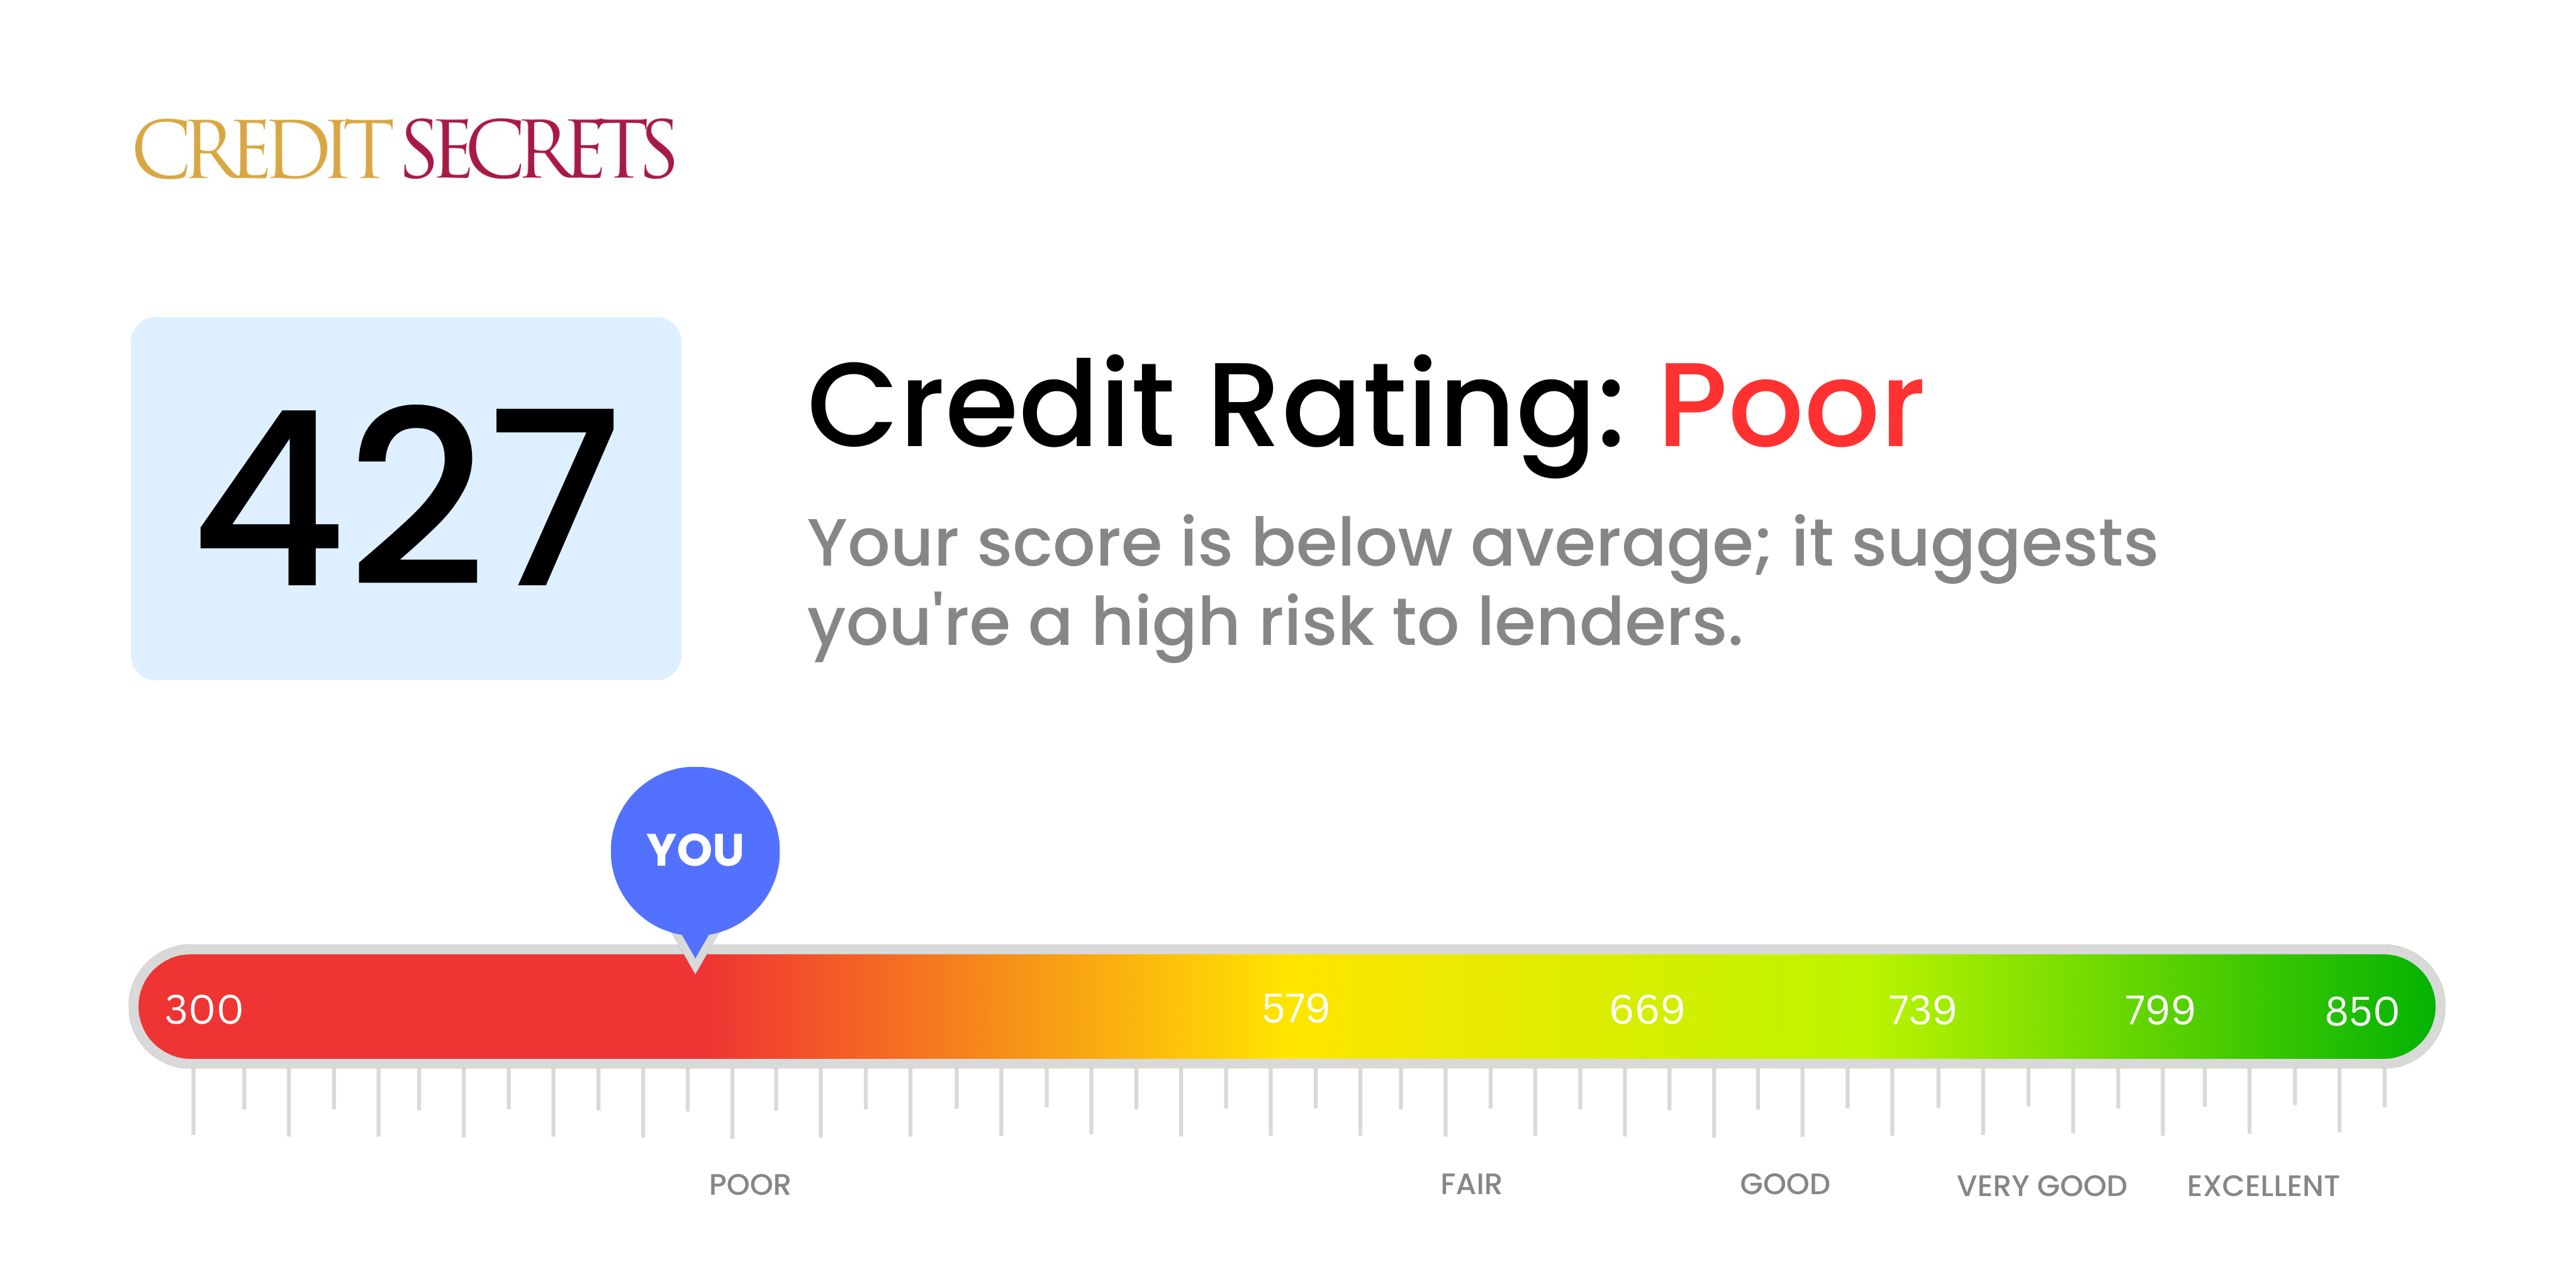 Is 427 a good credit score?